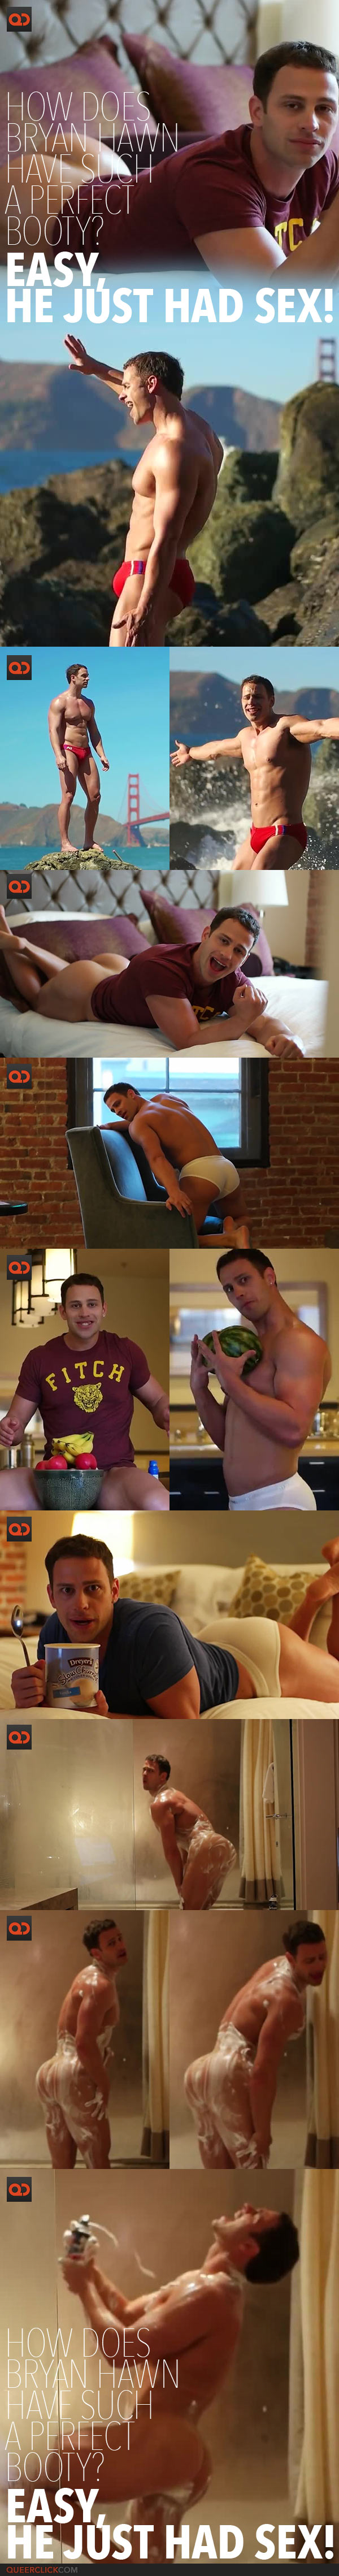 How Does Bryan Hawn Have Such A Perfect Booty? Easy, He Just Had Sex!